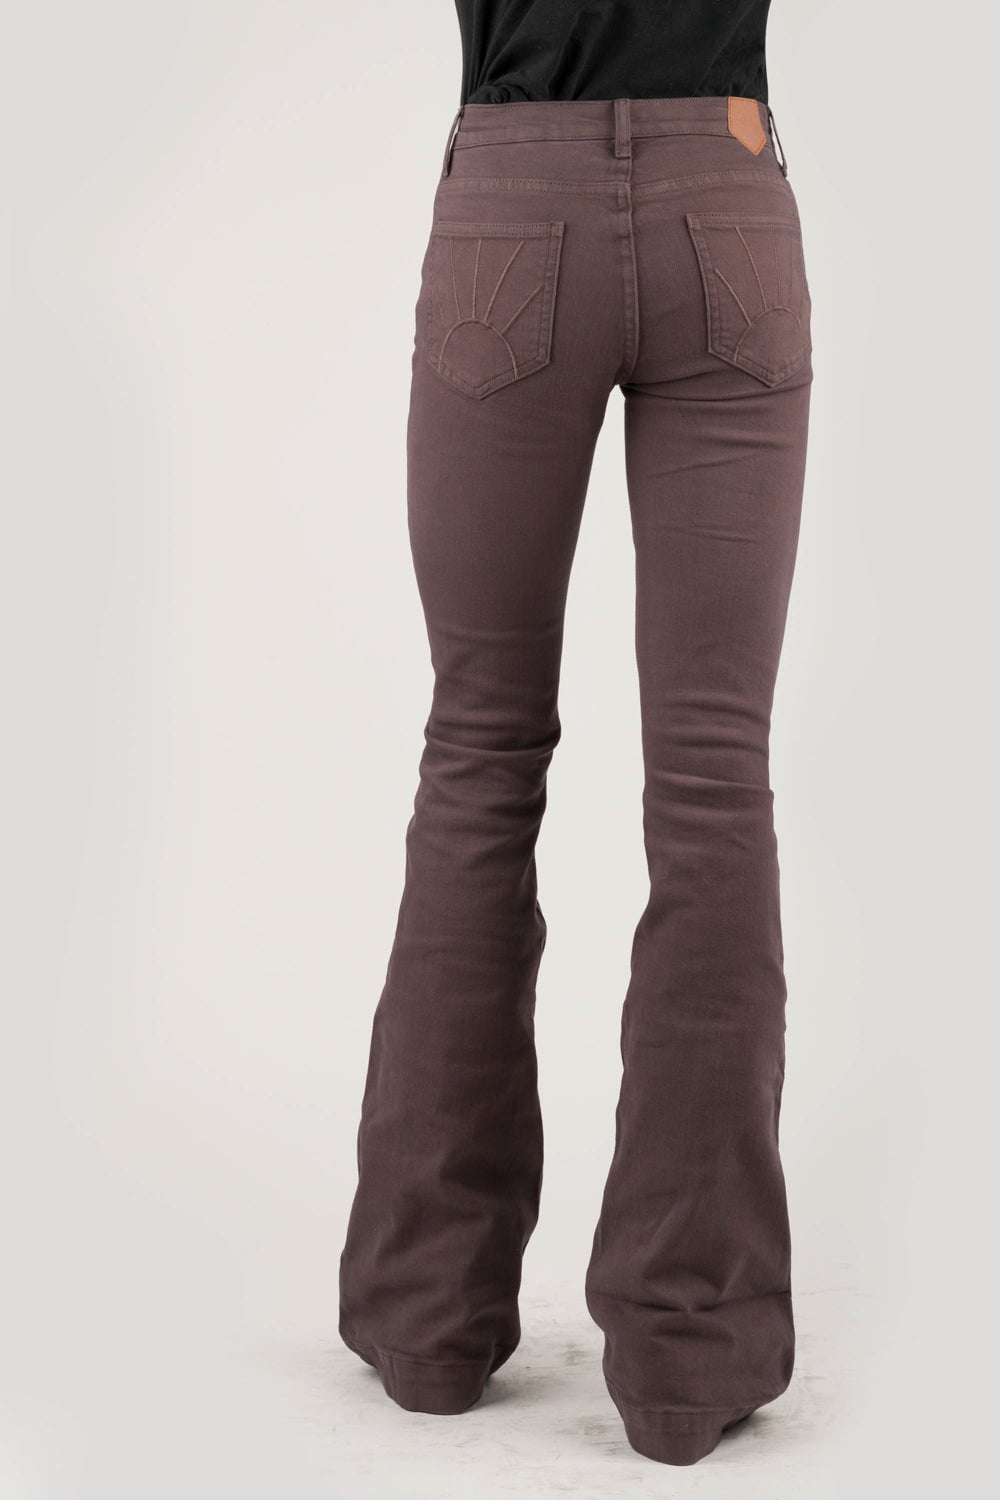 Tin Haul Womens Brown Cotton Blend 595 Libby Plain Jeans – The Western ...